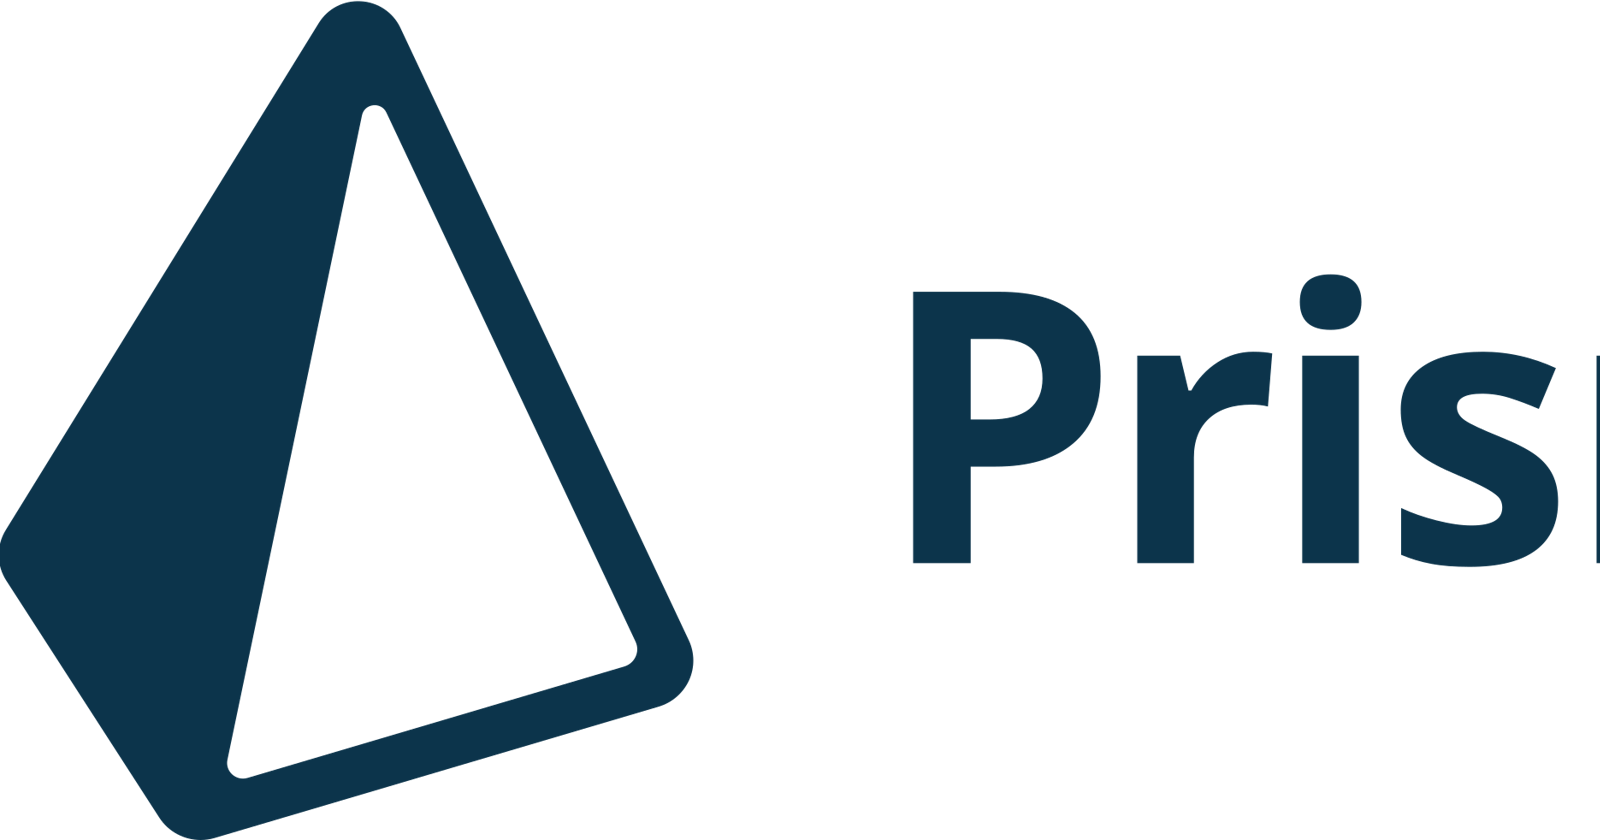 Prisma: A Revolutionary Approach to Database Management